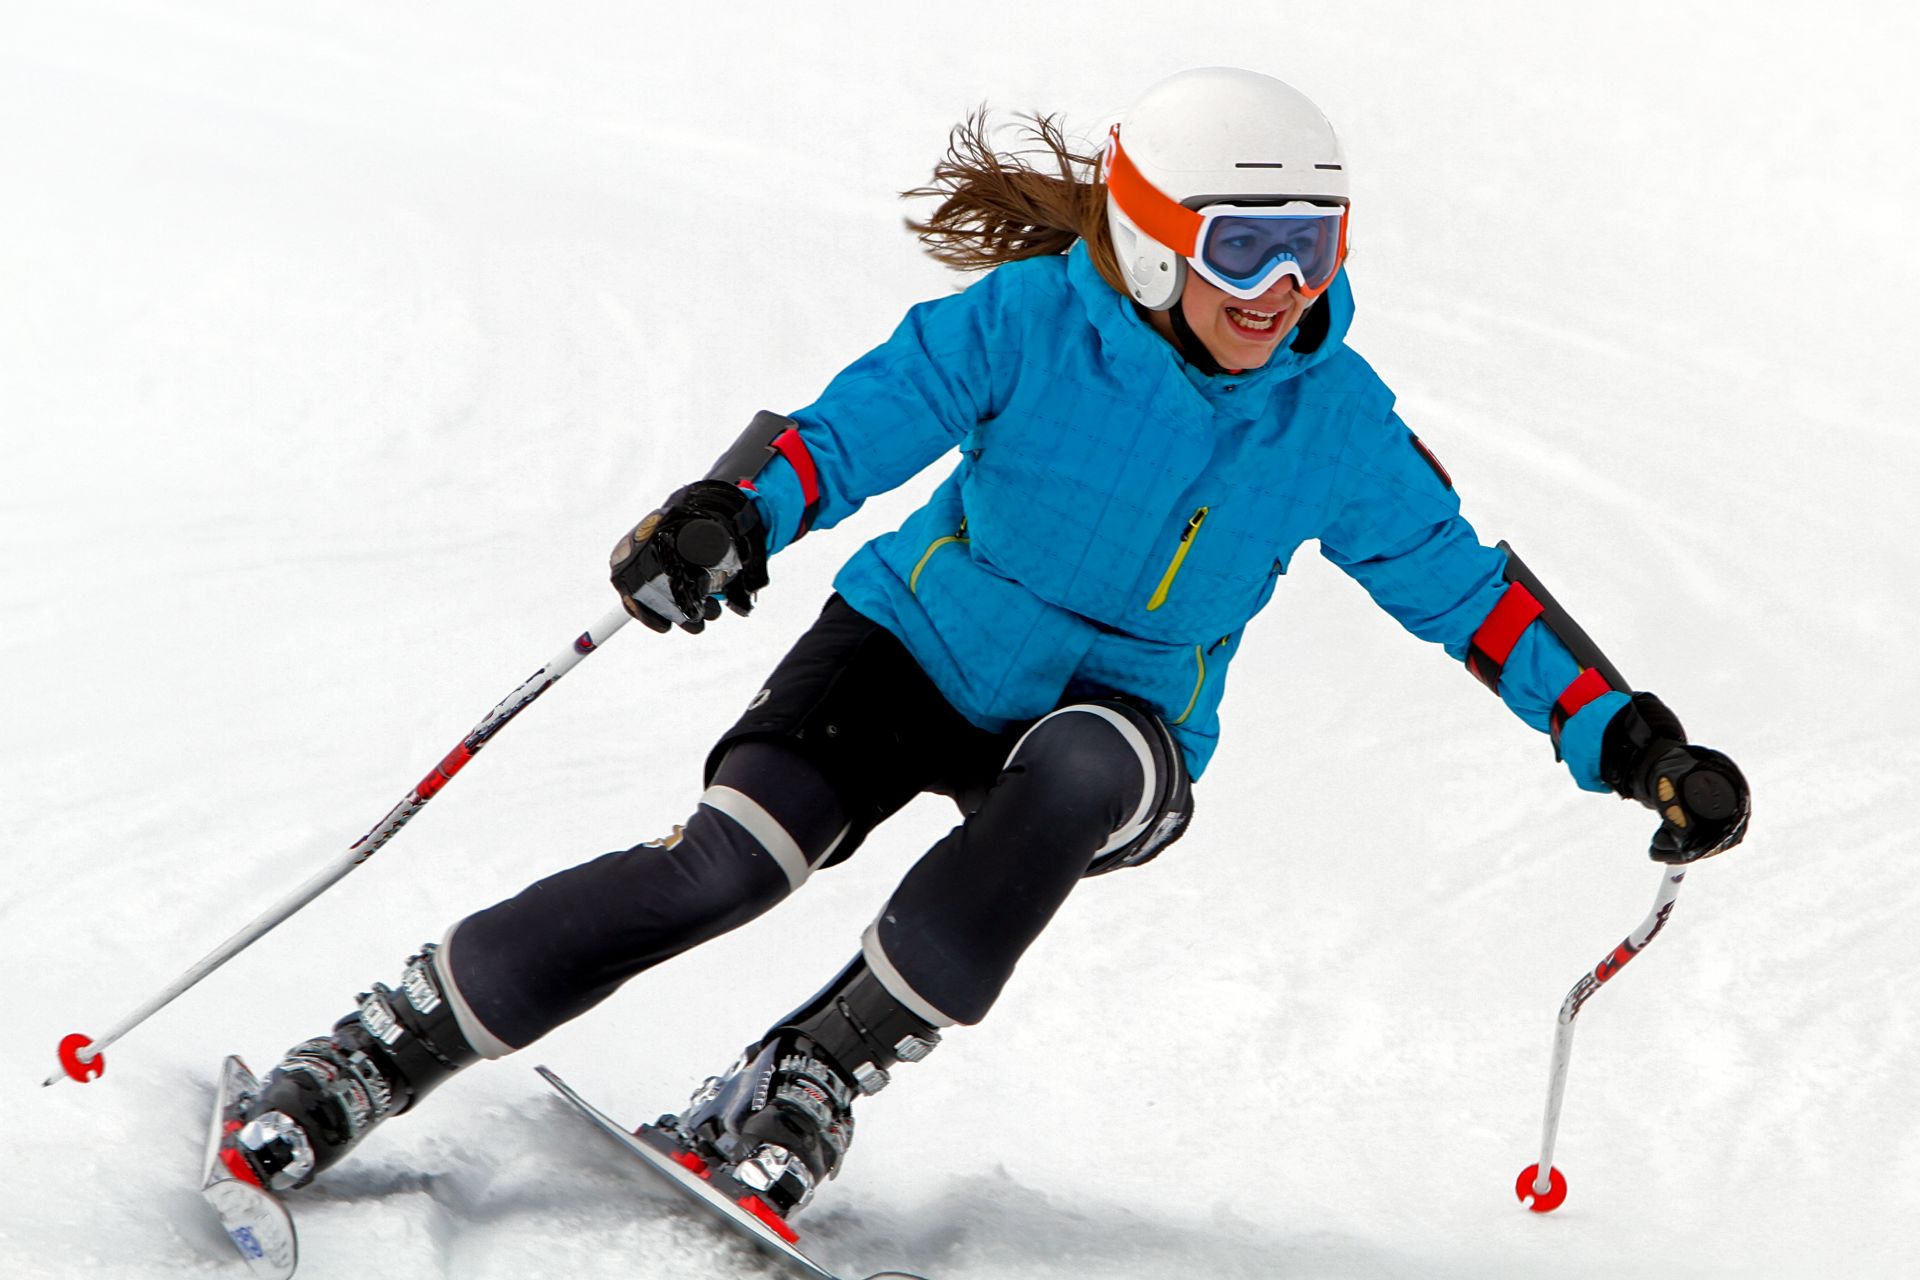 Facts About Skiing For Kids | DK Find Out